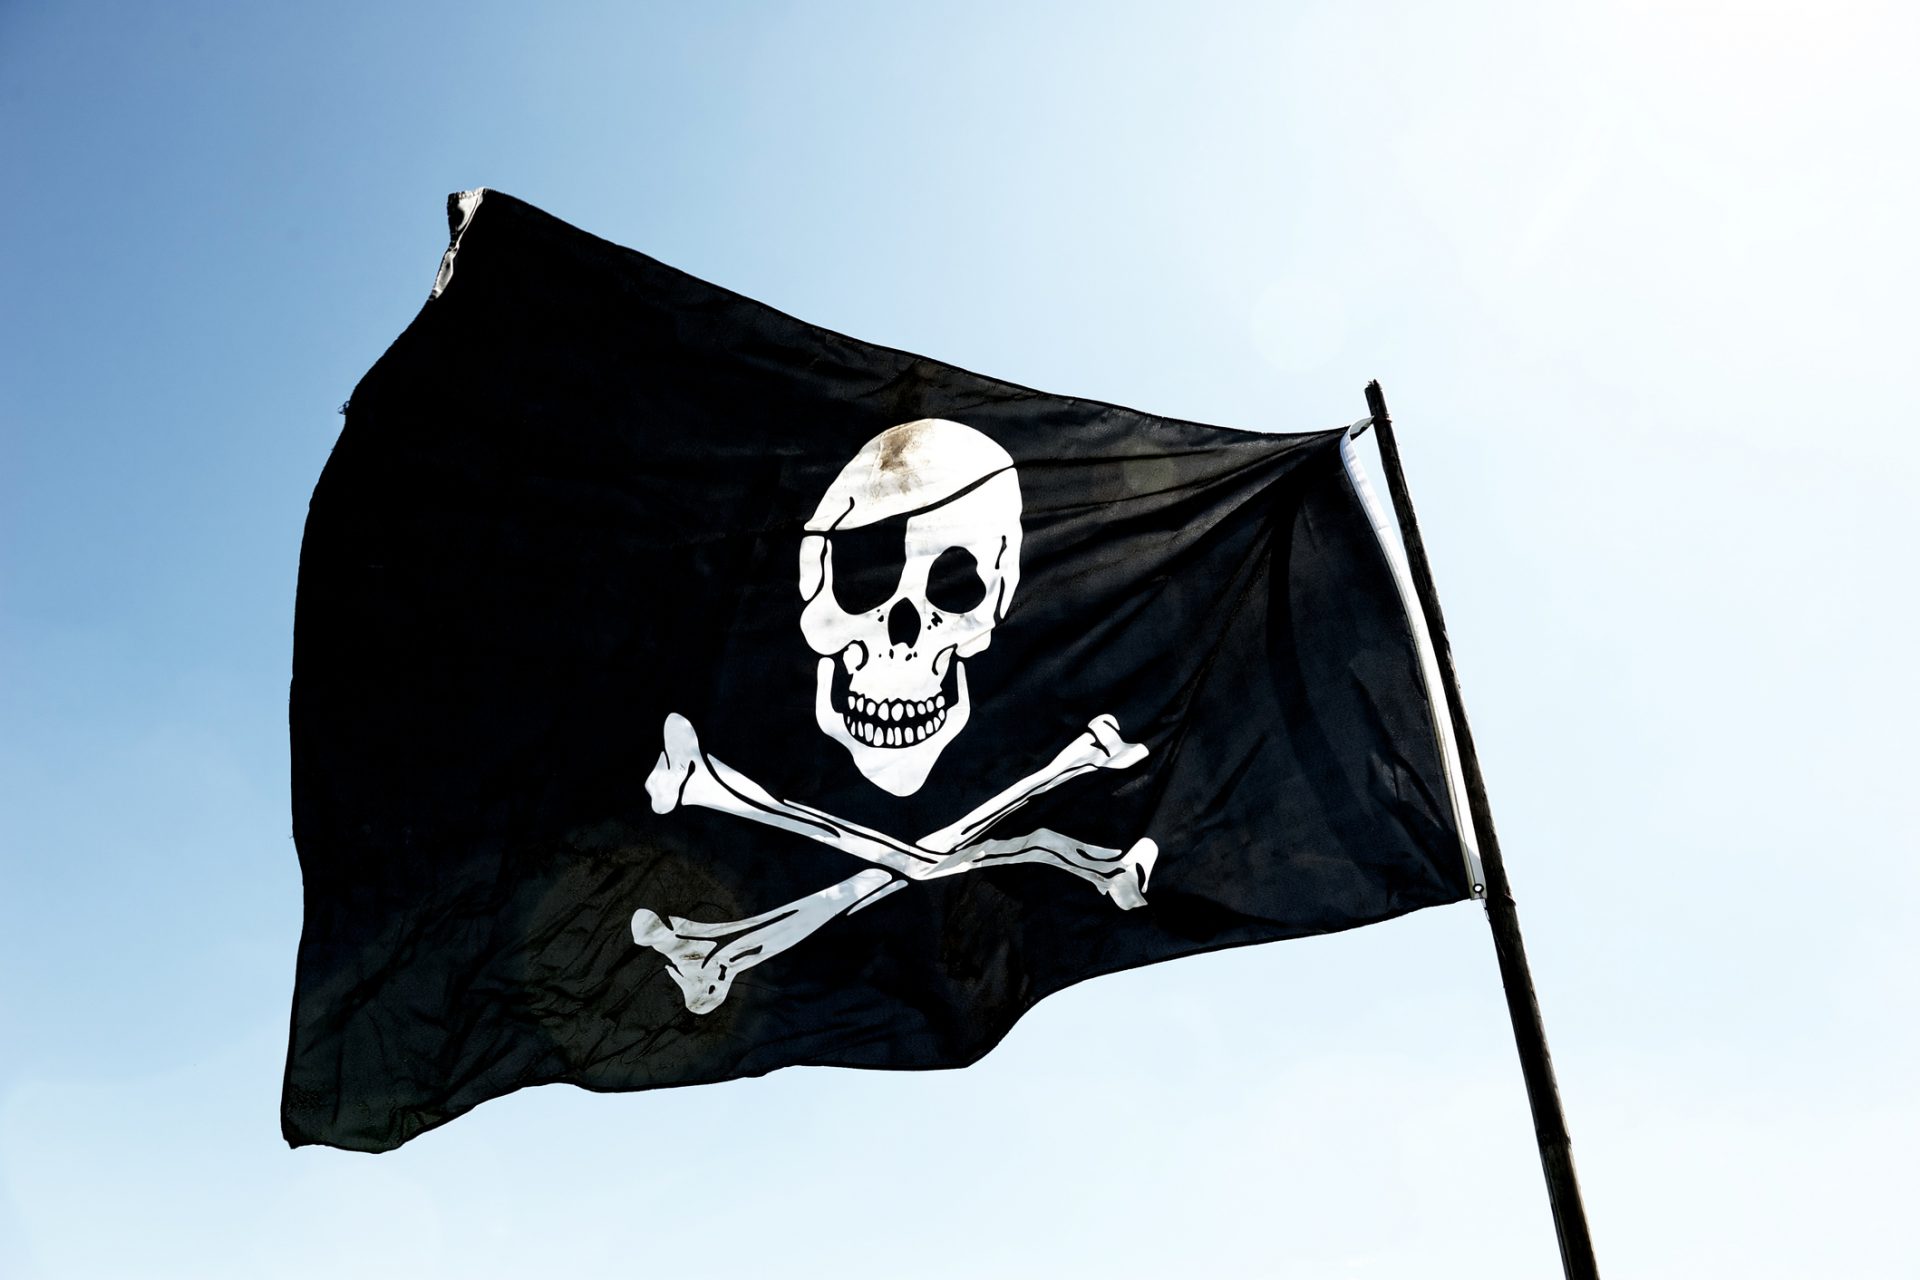 20 facts you probably didn’t know about pirates